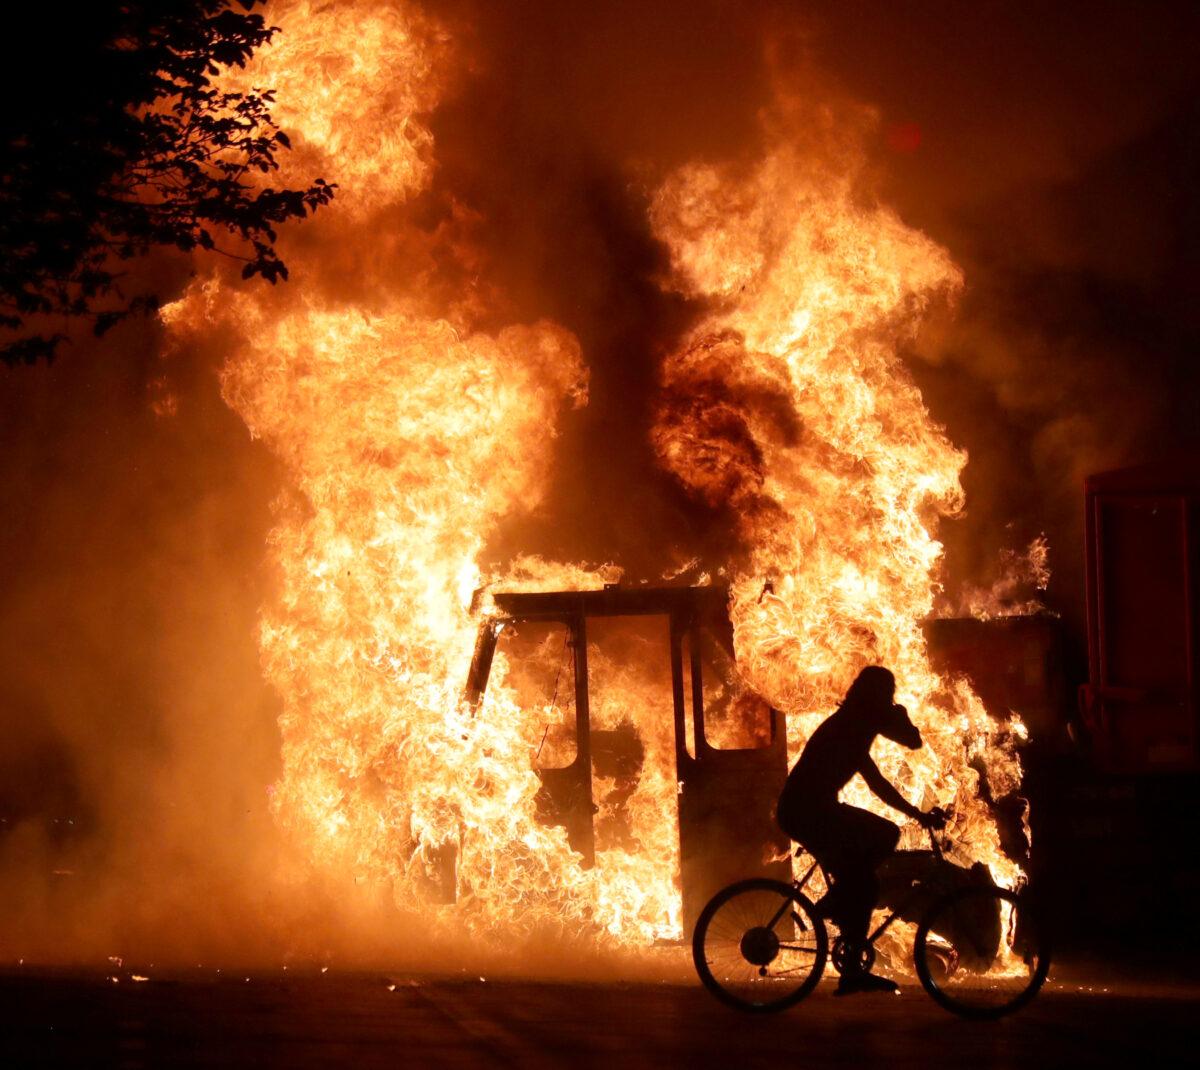 A man on a bike rides past a city truck on fire outside the Kenosha County Courthouse during unrest following the police shooting of Jacob Blake in Kenosha, Wis., on Aug. 23, 2020. (Mike De Sisti/Milwaukee Journal Sentinel via USA TODAY via Reuters)